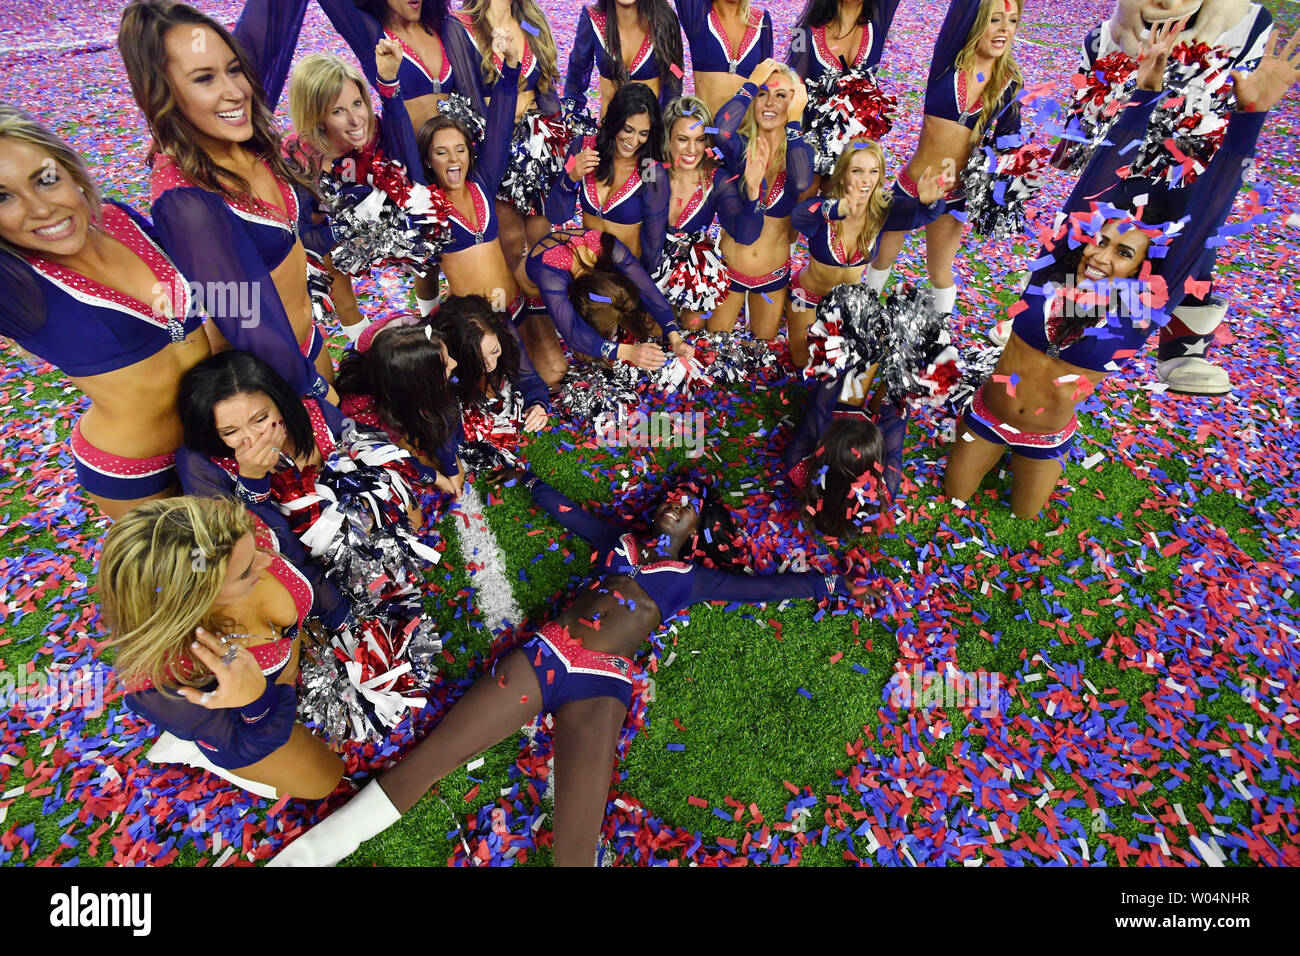 New England Patriots cheerleaders celebrate after their team defeated the  Atlanta Falcons in Super Bowl LI at NRG Stadium in Houston on February 5,  2017. The Patriots defeated the Falcons 34-28 in